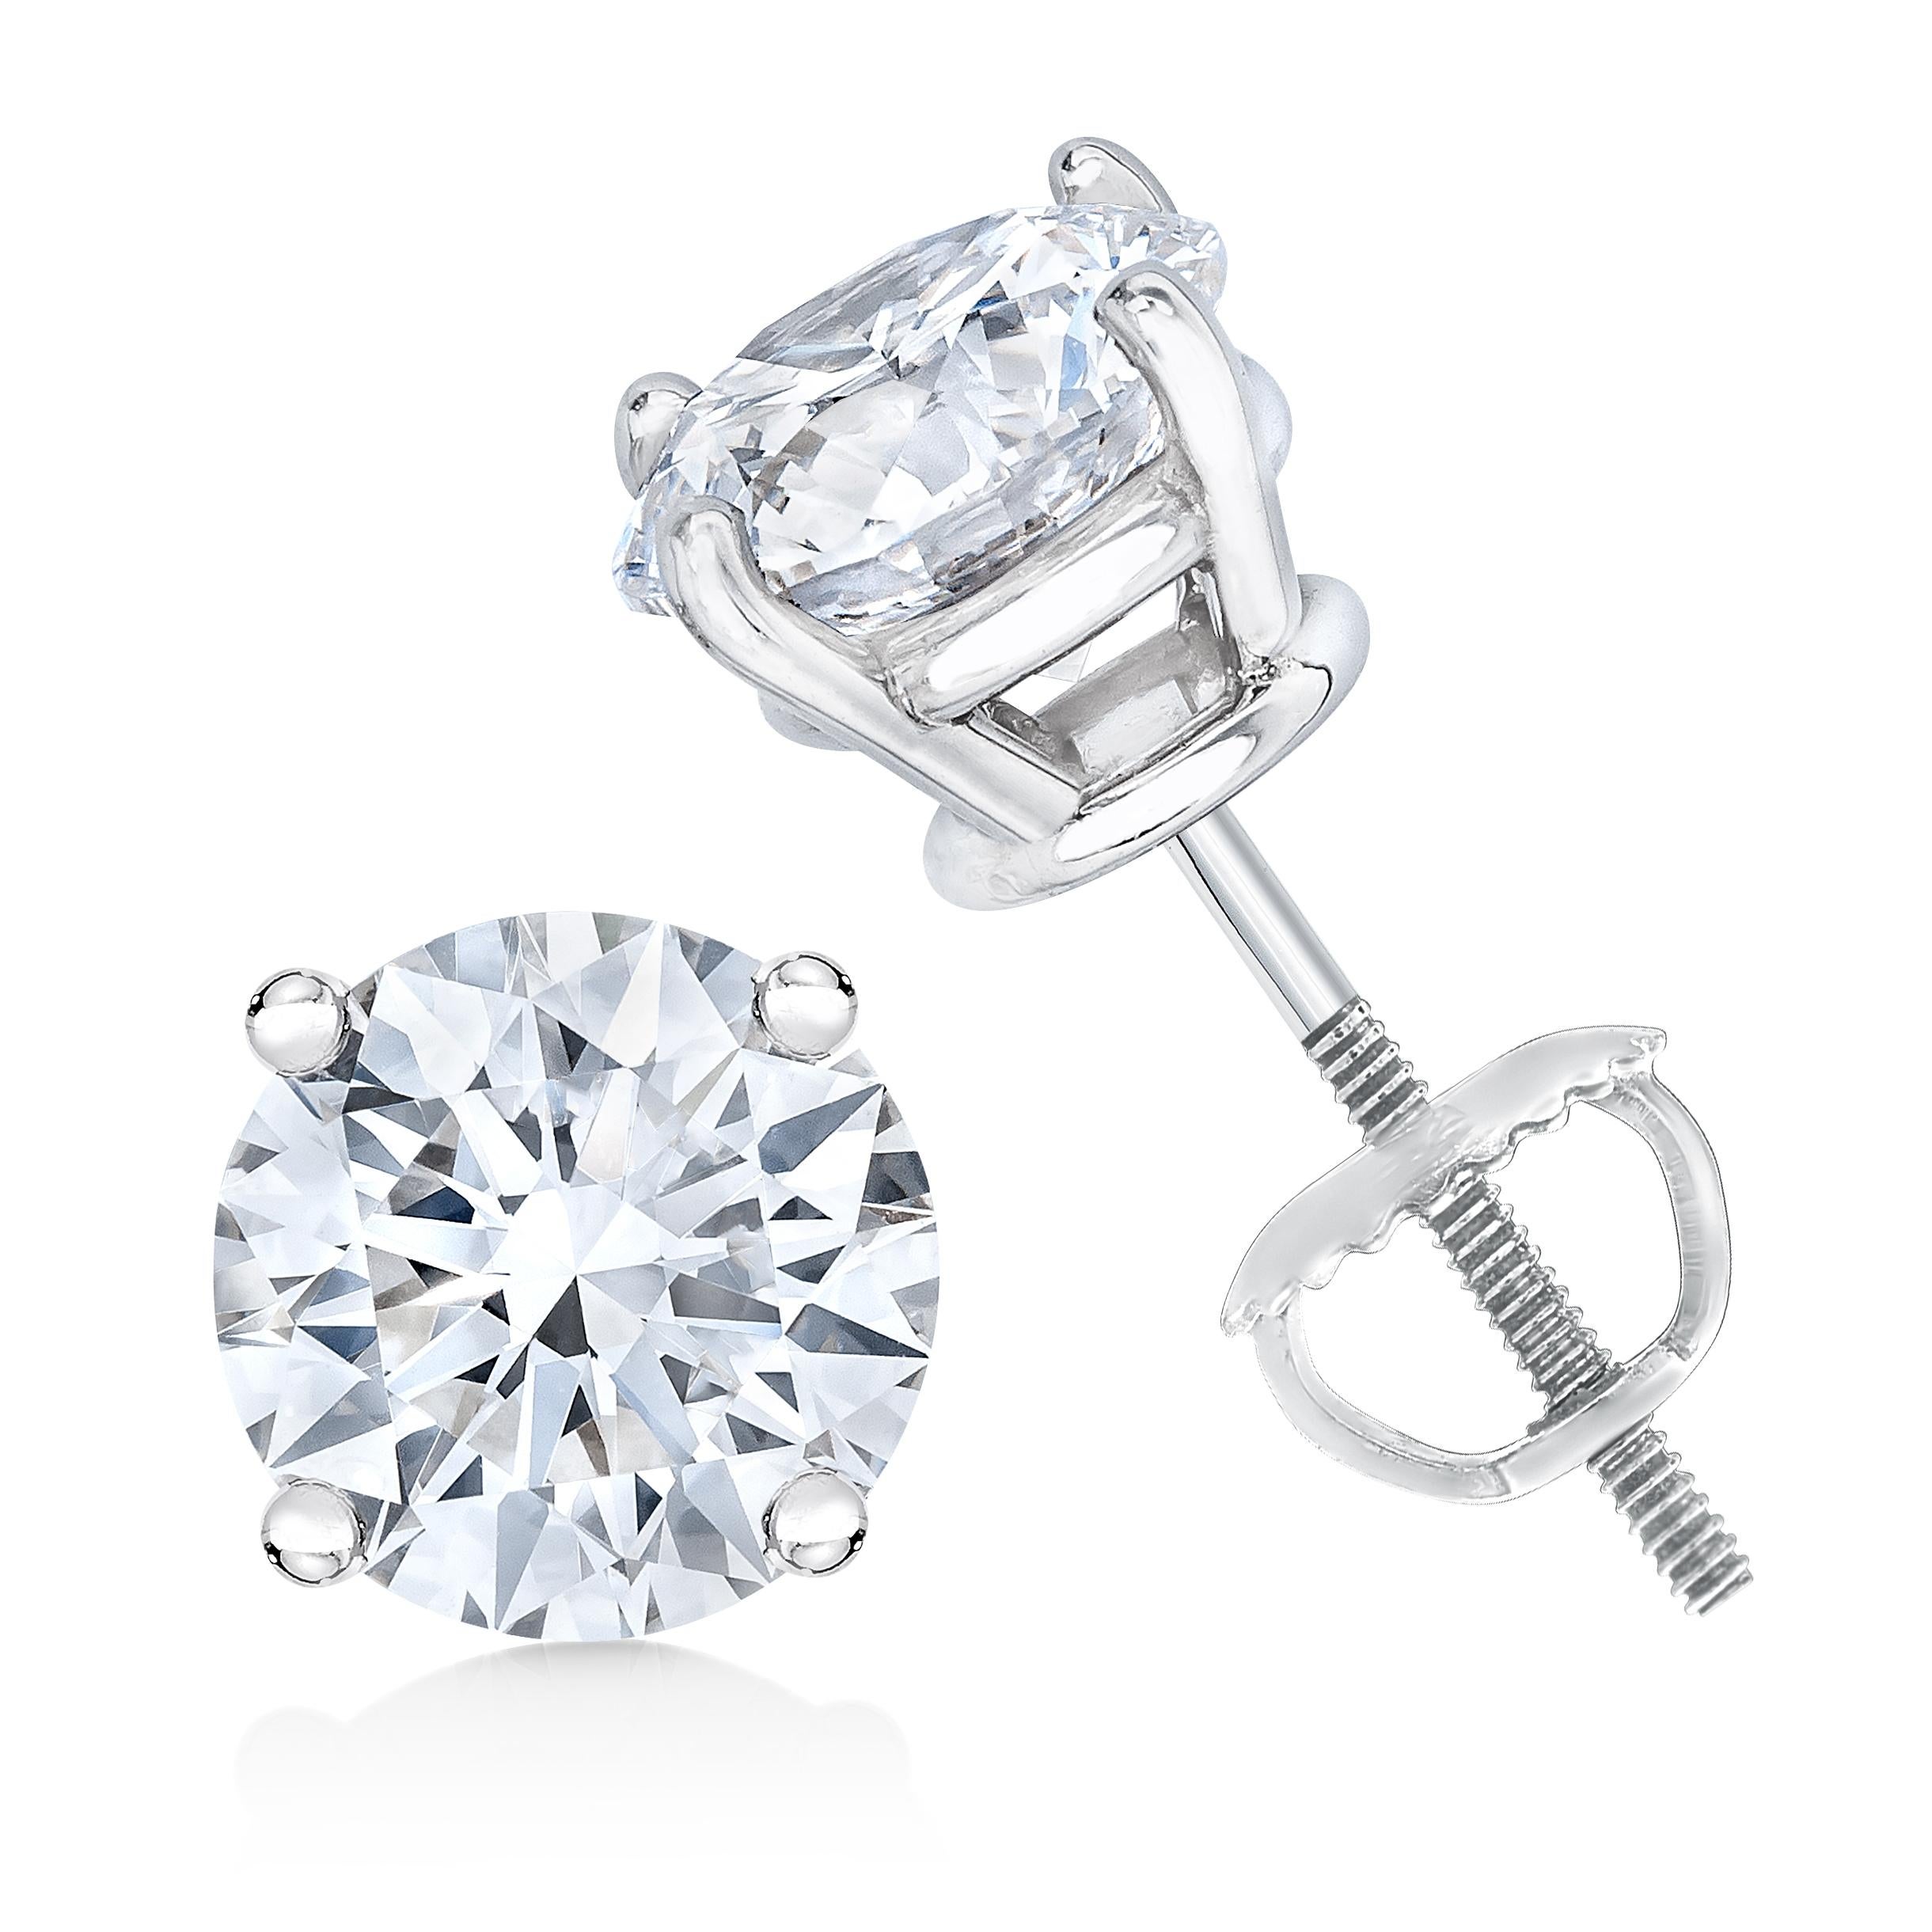 Two gorgeous white diamonds sit in a prong setting on these sparkling stud earrings. Crafted in 14k white gold, these diamond stud earrings feature a high polish finish with a screw on mechanism to secure. These stunning gold earrings feature 1.5